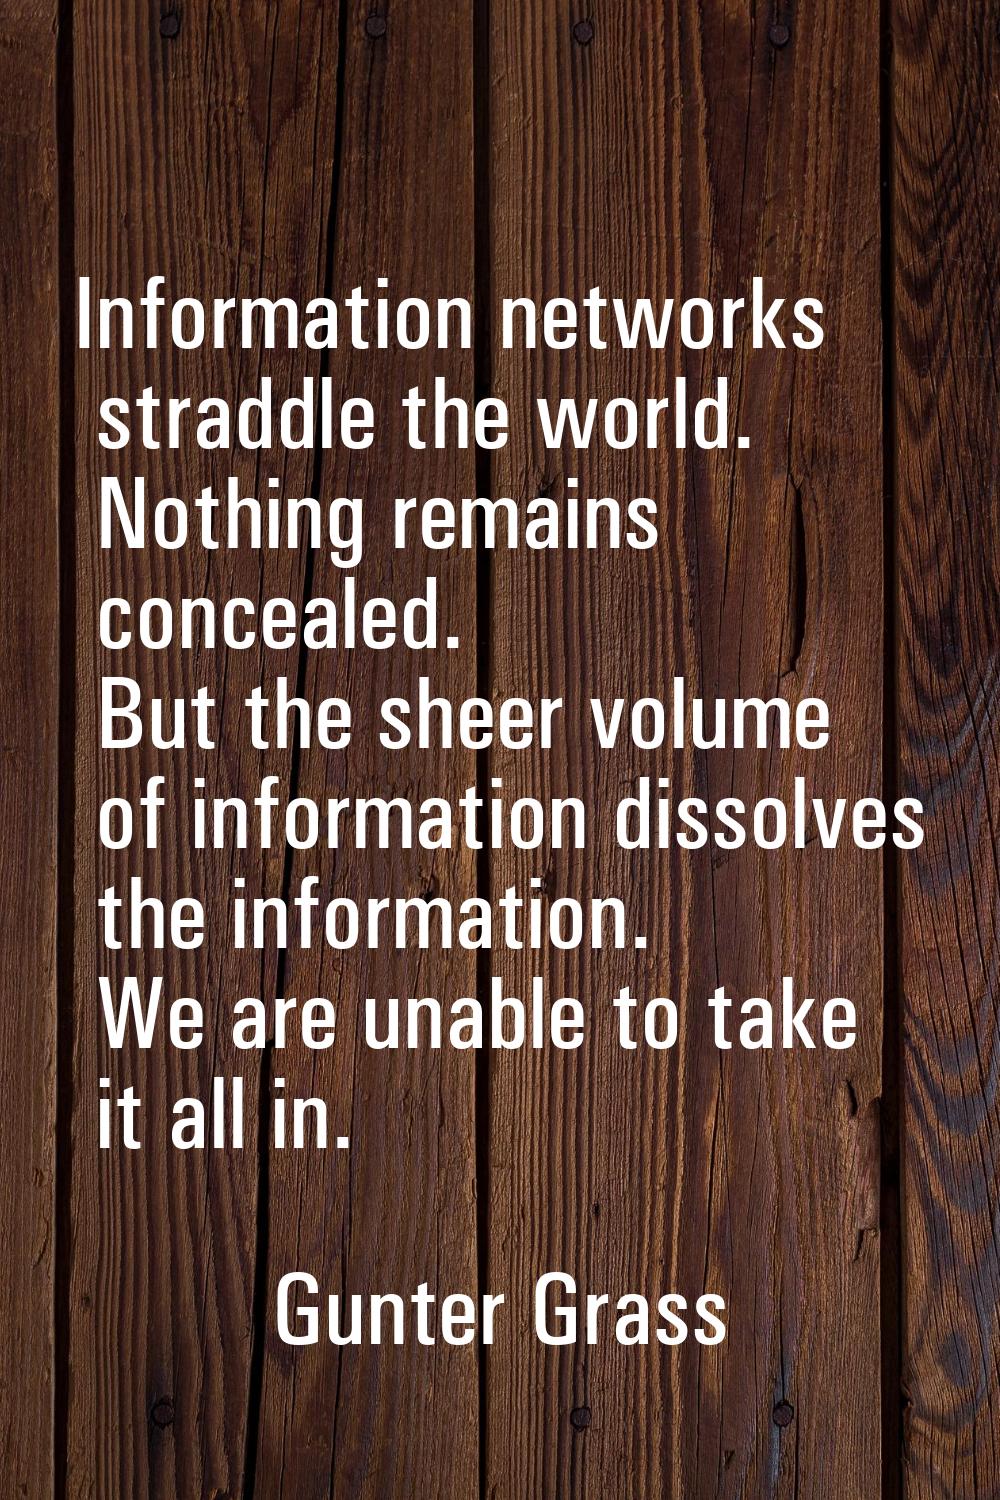 Information networks straddle the world. Nothing remains concealed. But the sheer volume of informa